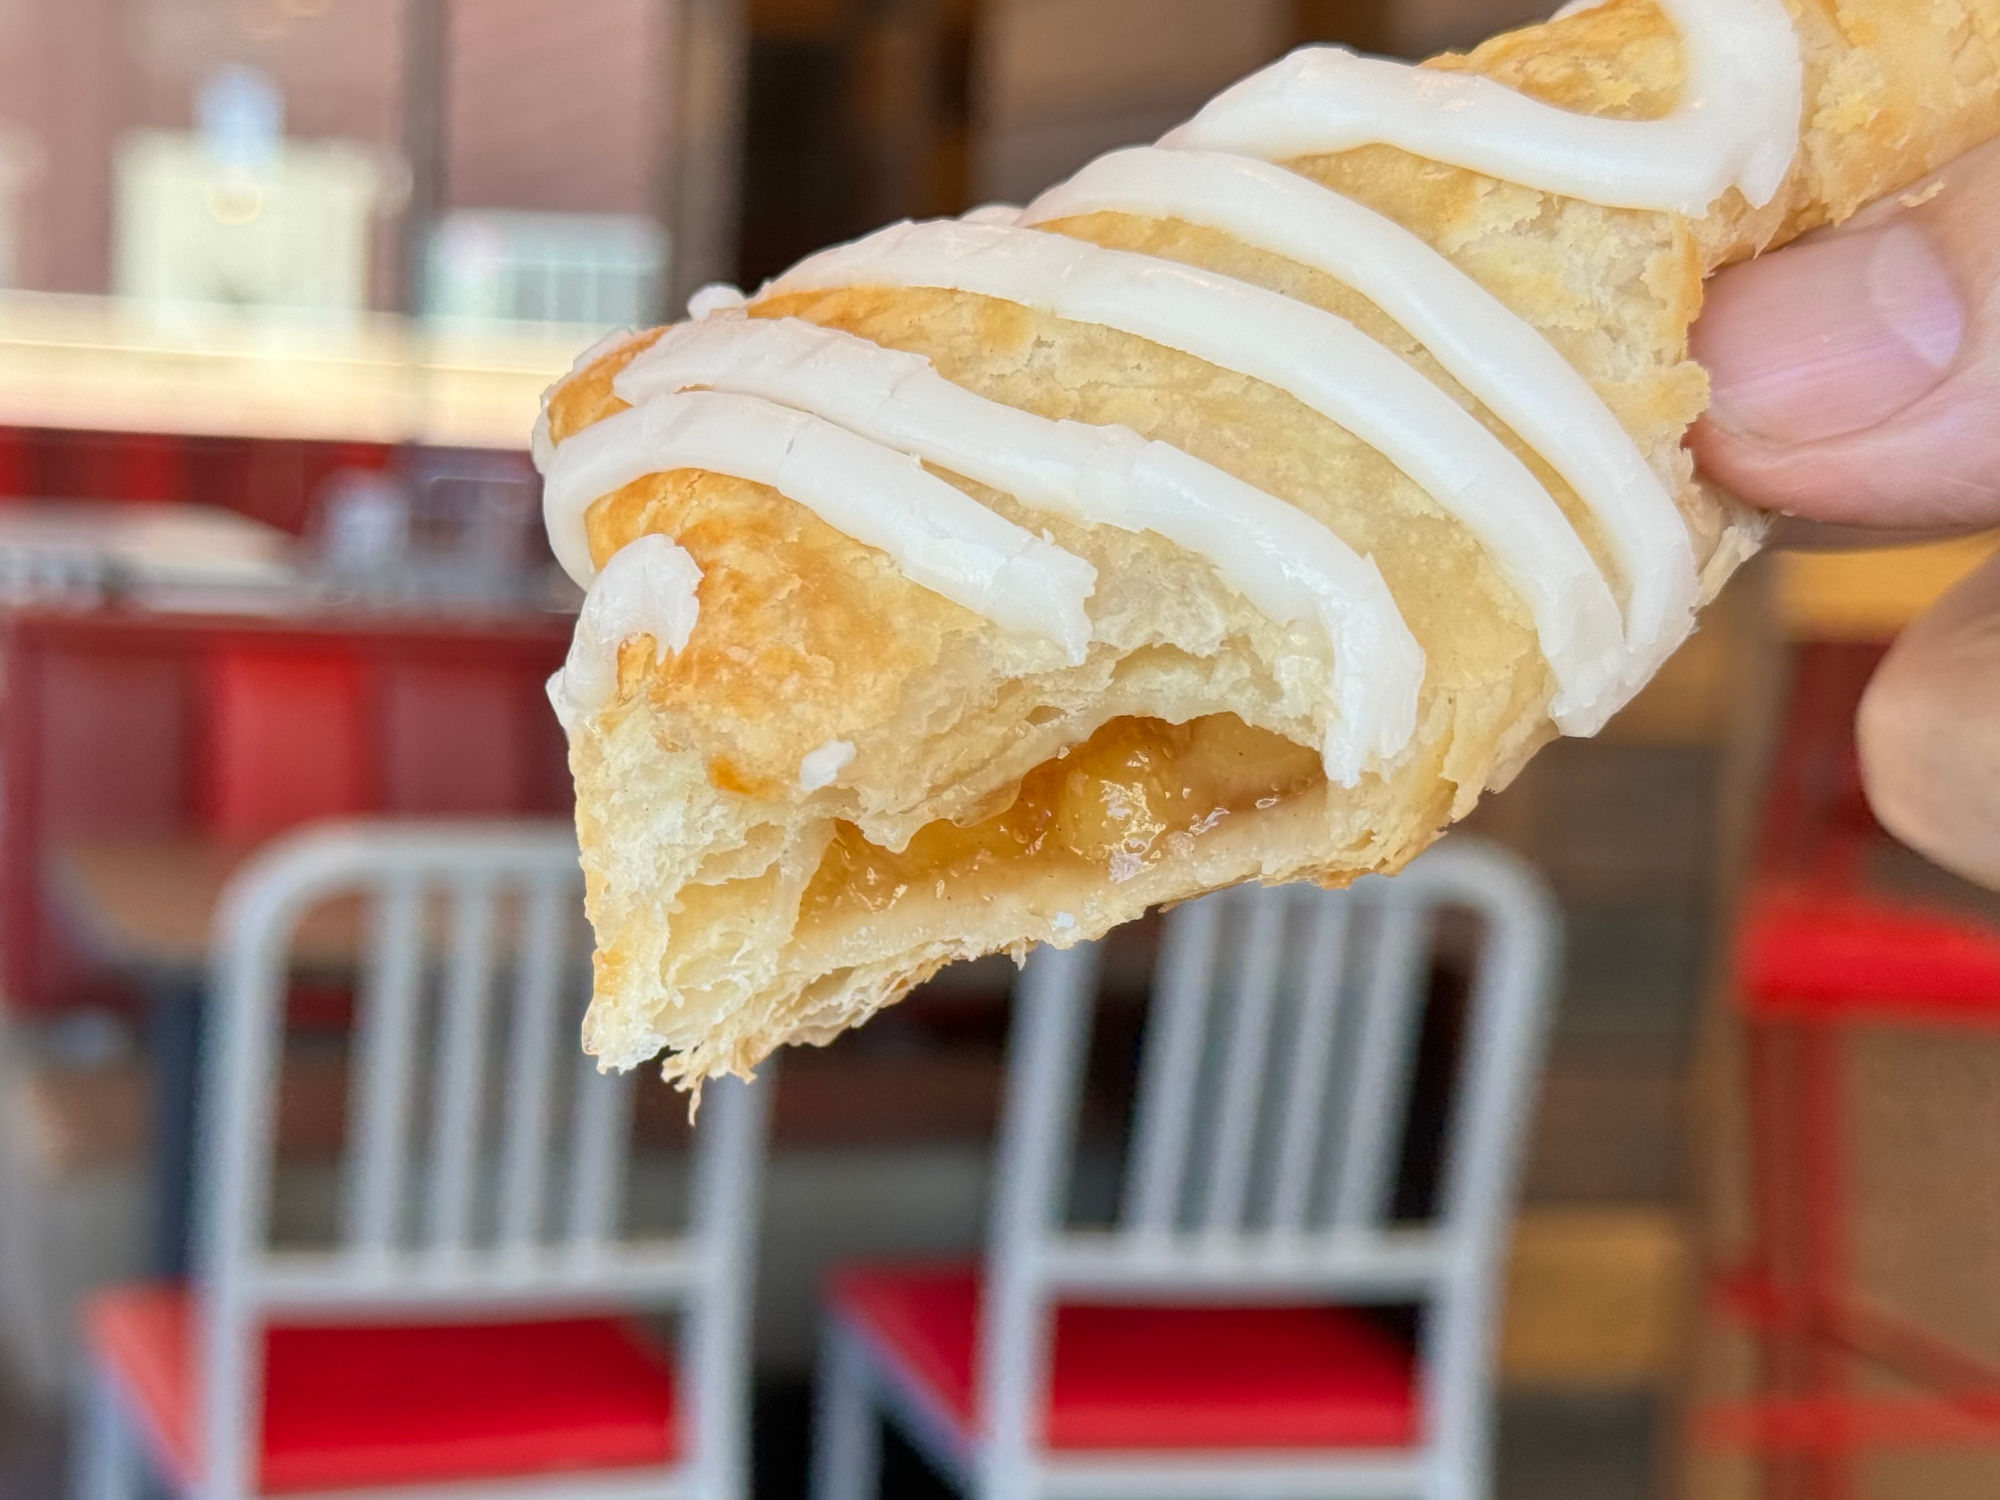 Arby's Apple Turnover Inside